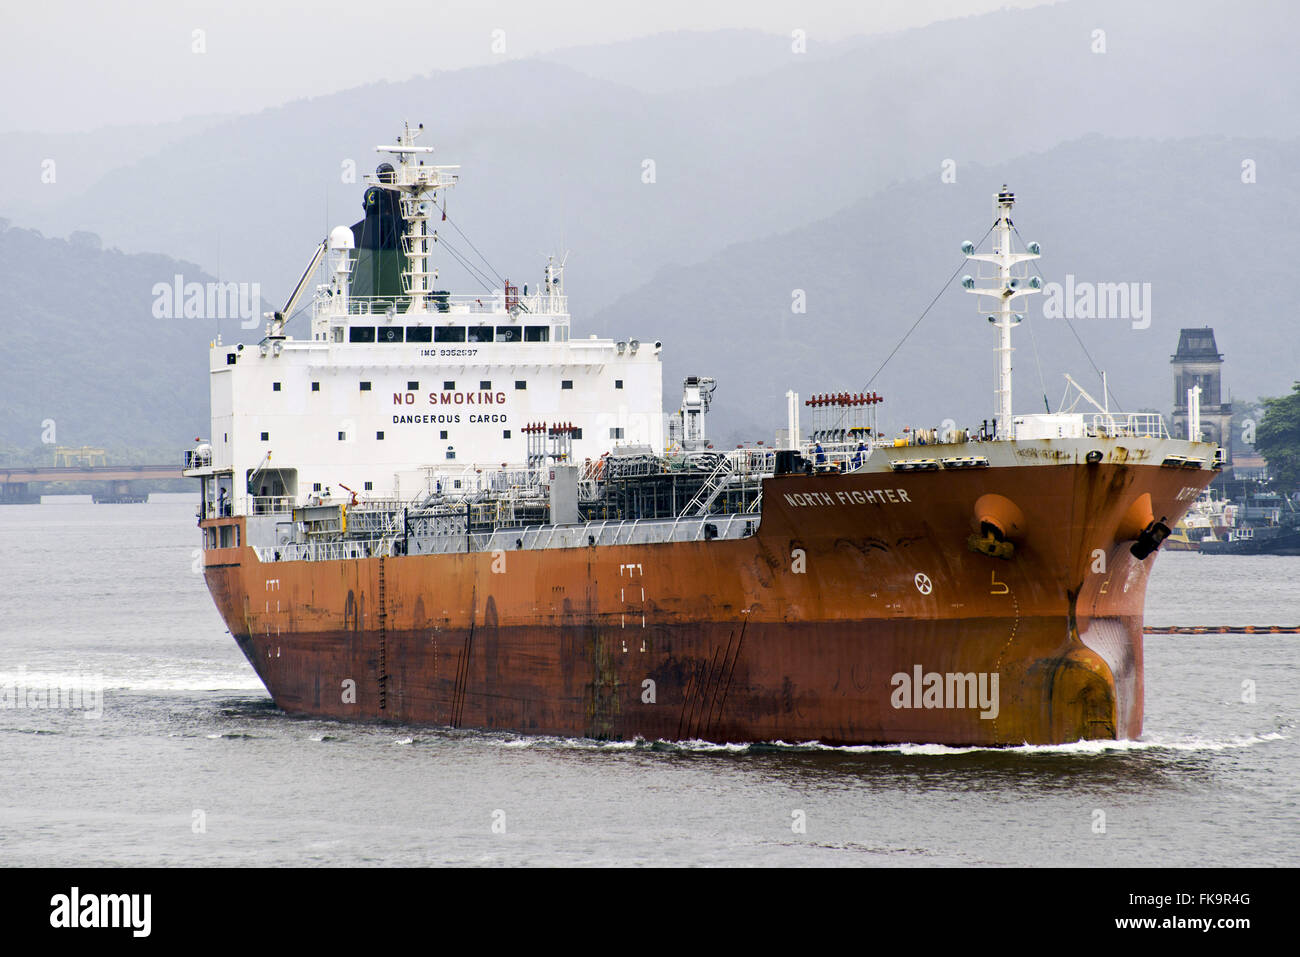 Port of Santos - tanker carrying oil and chemicals Stock Photo